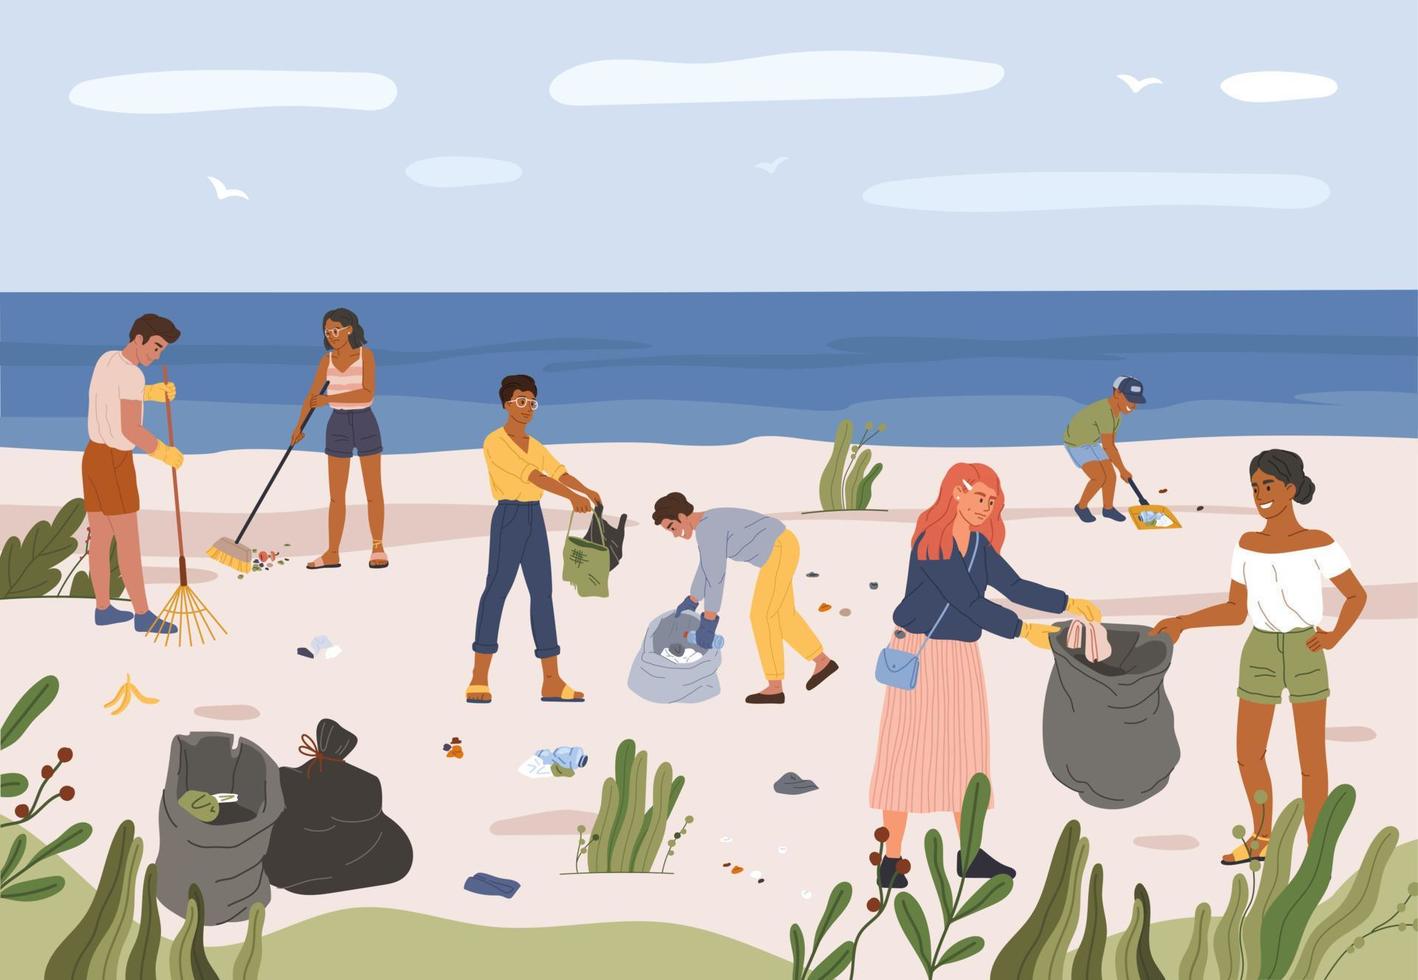 People collecting garbage on beach. Men and women gathering plastic waste in trash bags. Volunteers picking up trash at seaside vector illustration